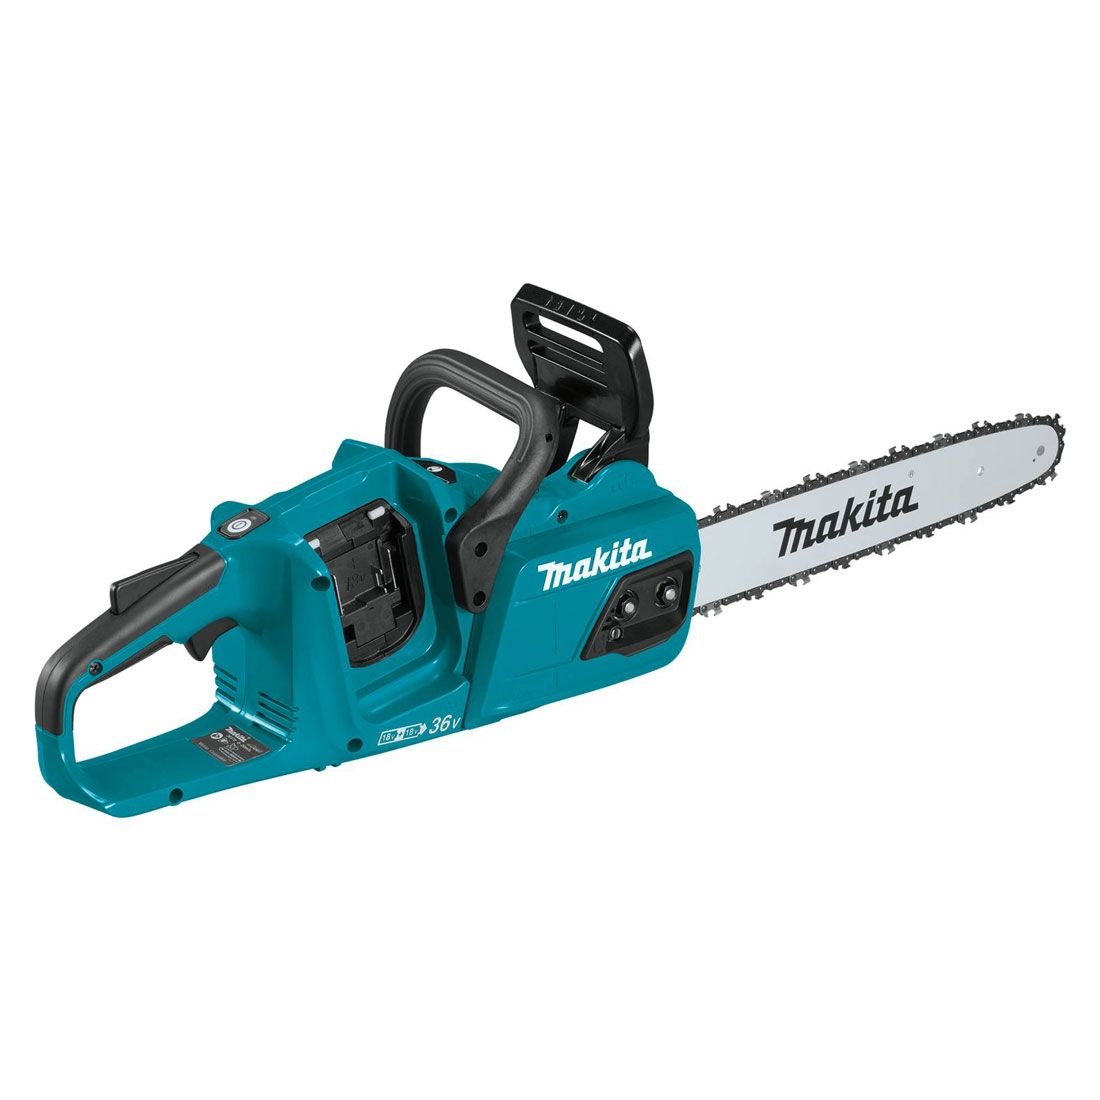 Makita 36v (Twin 18v) 14in 350mm Chainsaw - DUC355Z - Body Only